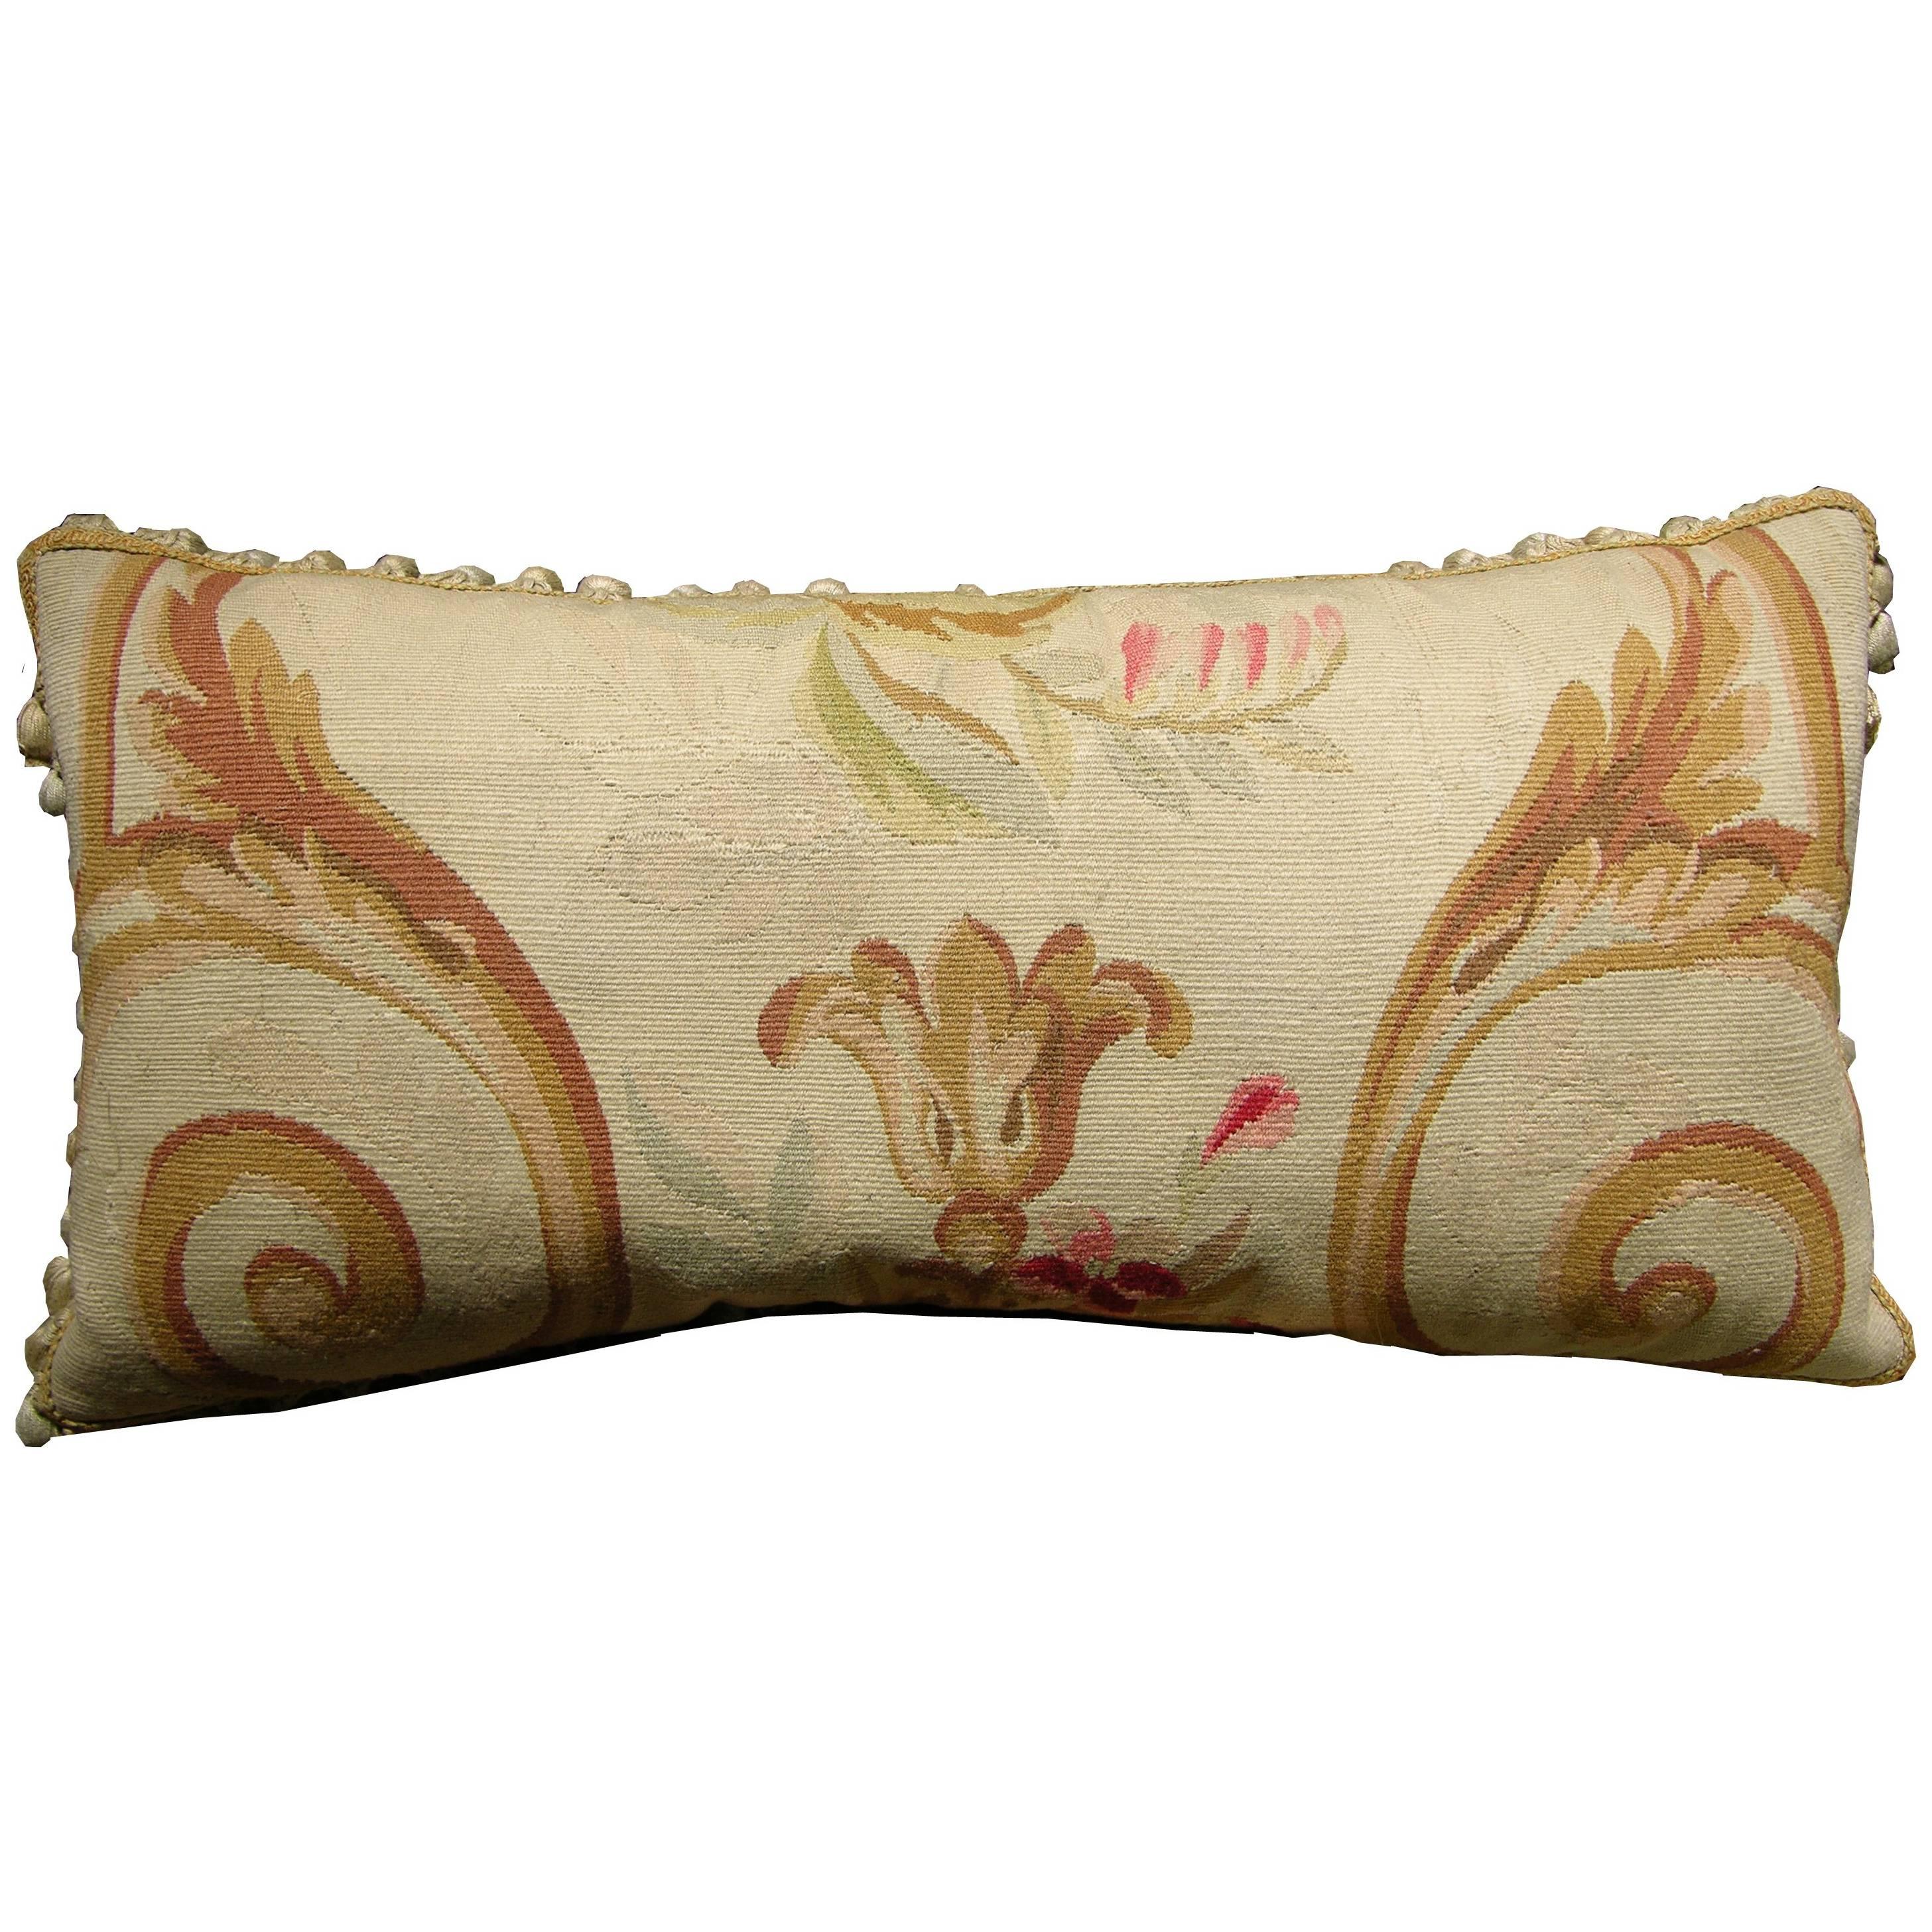 Antique French Aubusson Tapestry Pillow, circa 1860 1188p For Sale